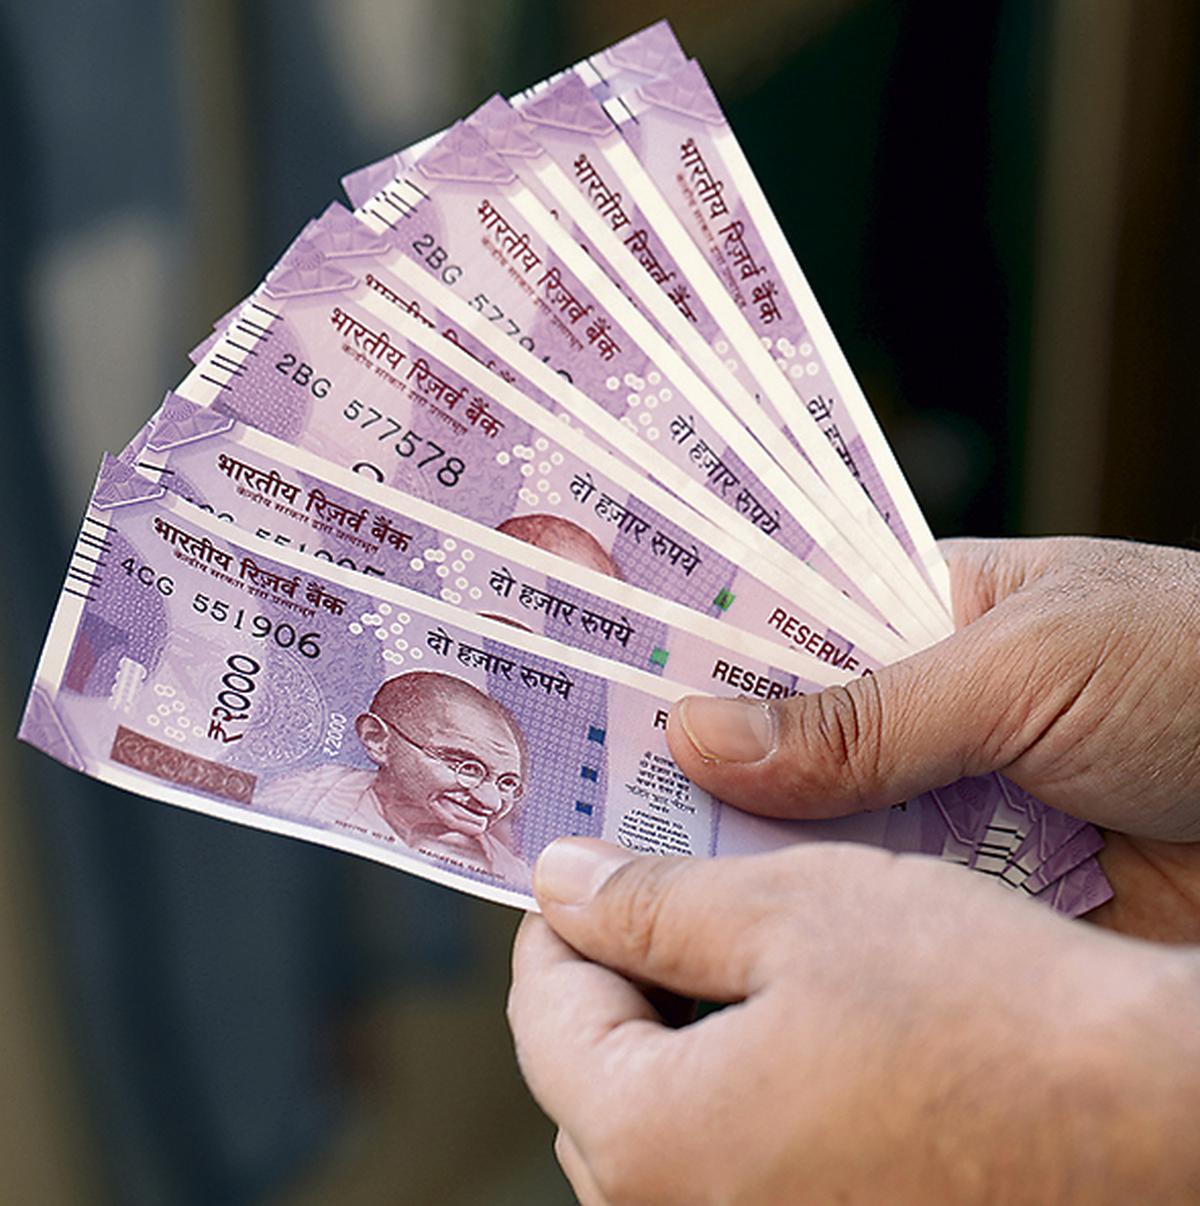 The rupee declined 31 paise to shut at 82.78 versus the US dollar